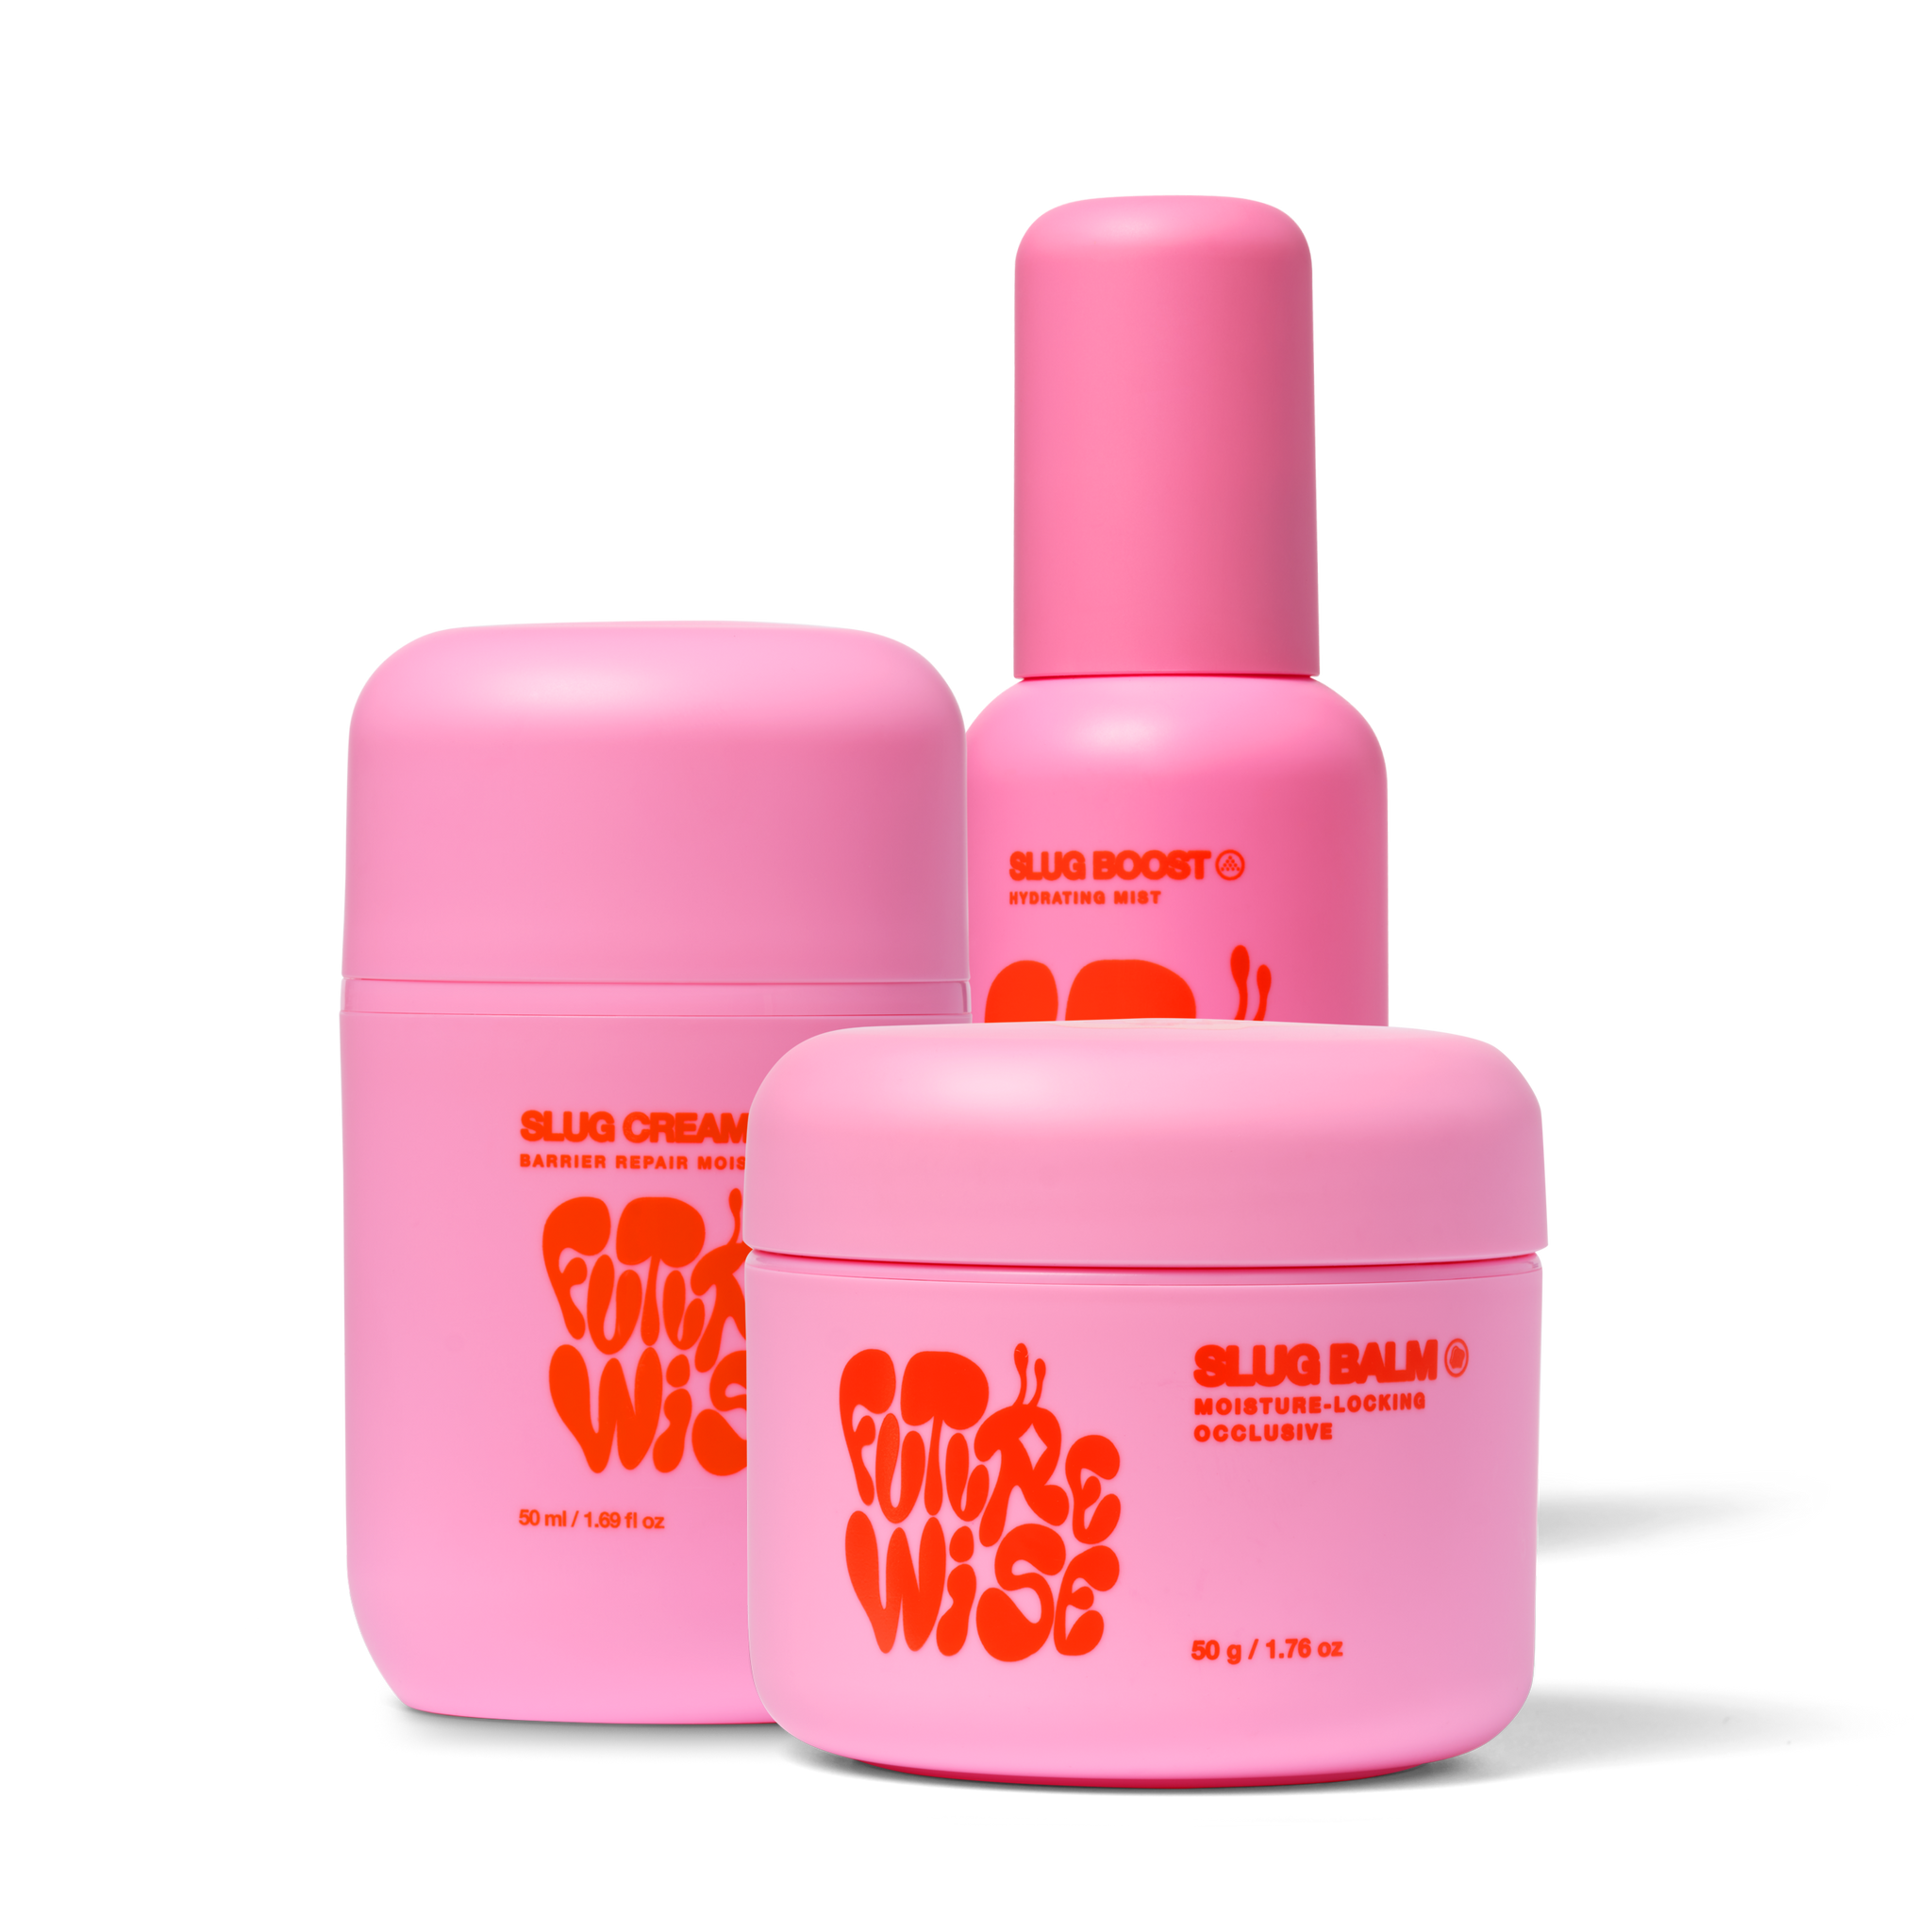 Front facing studio shot of the Slugging System product bundle, pink components with red text featuring the Futurewise logo